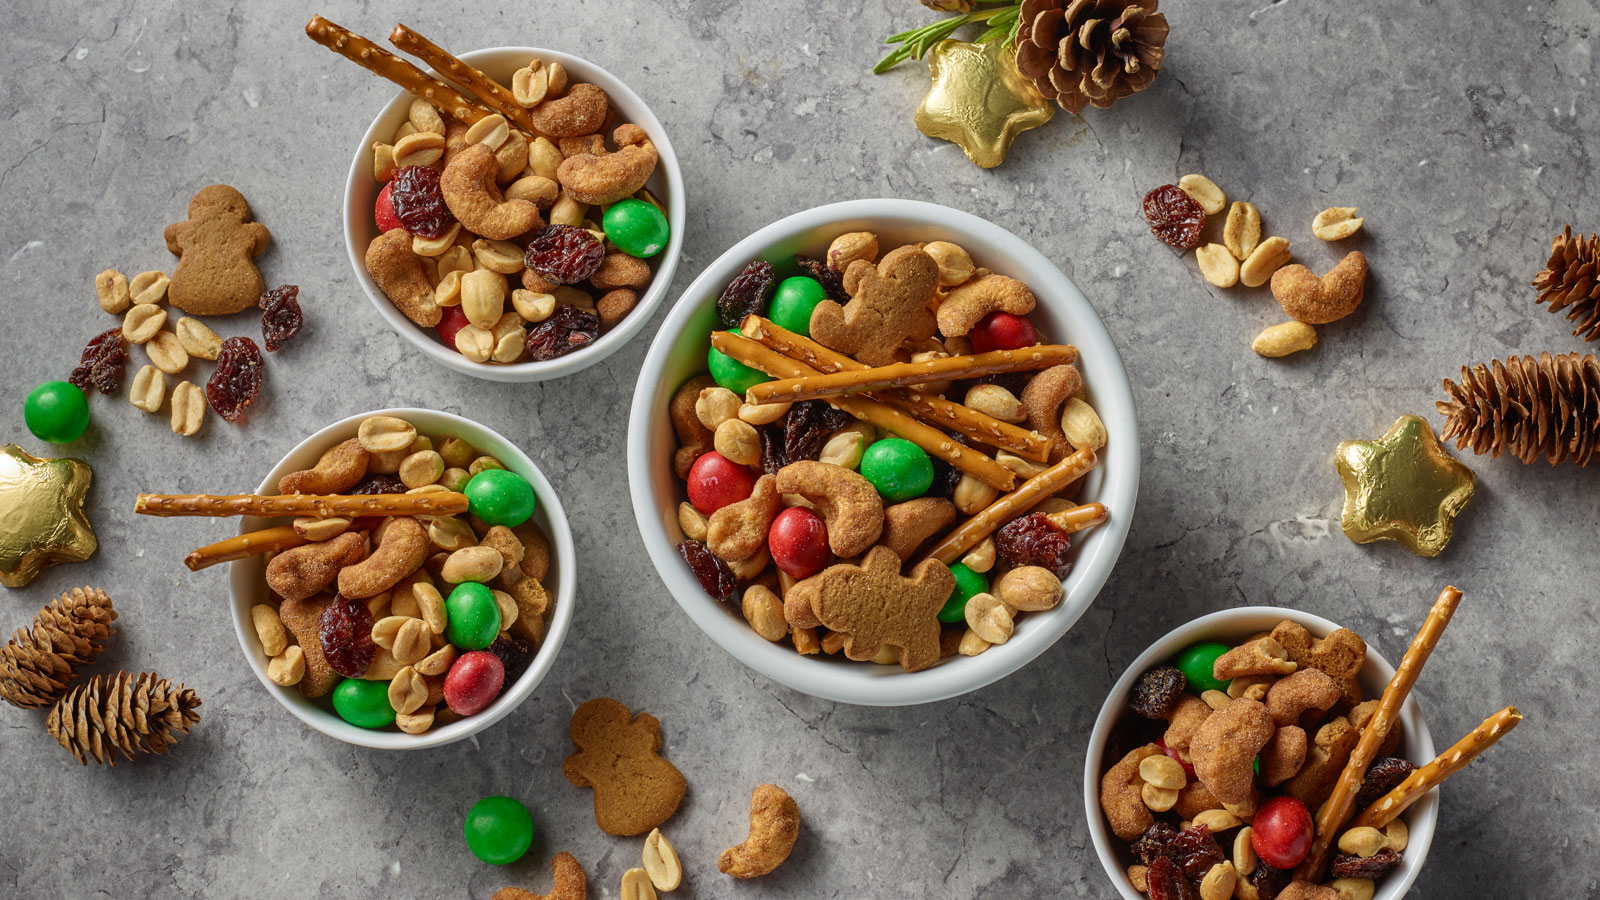 Whether you're hosting a festive soirée, cozying up by the fire, or looking for a quick snack to share, our Holiday Snack Mix is your go-to choice.